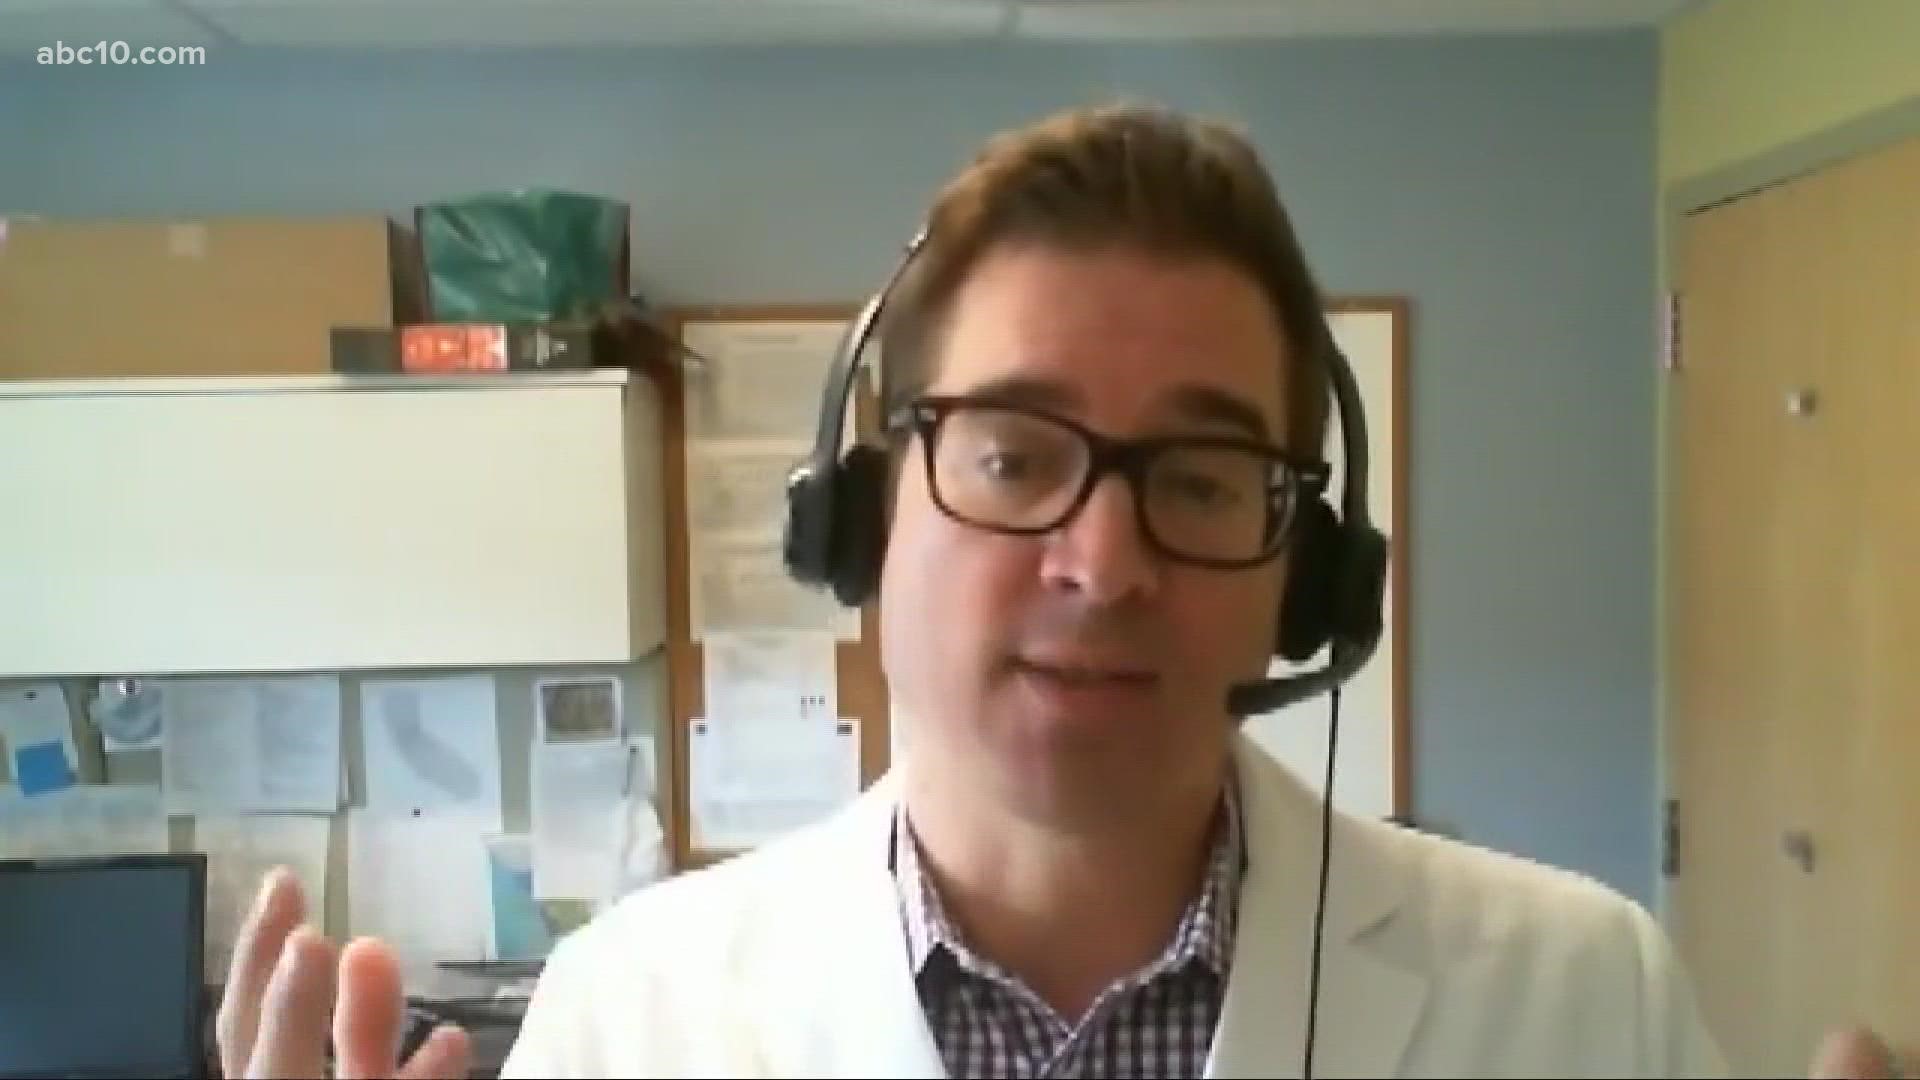 Dr. Michael Vollmer, a Northern California Regional Epidemiologist with Kaiser Permanente, spoke with ABC10 to break down what's known about the variant.